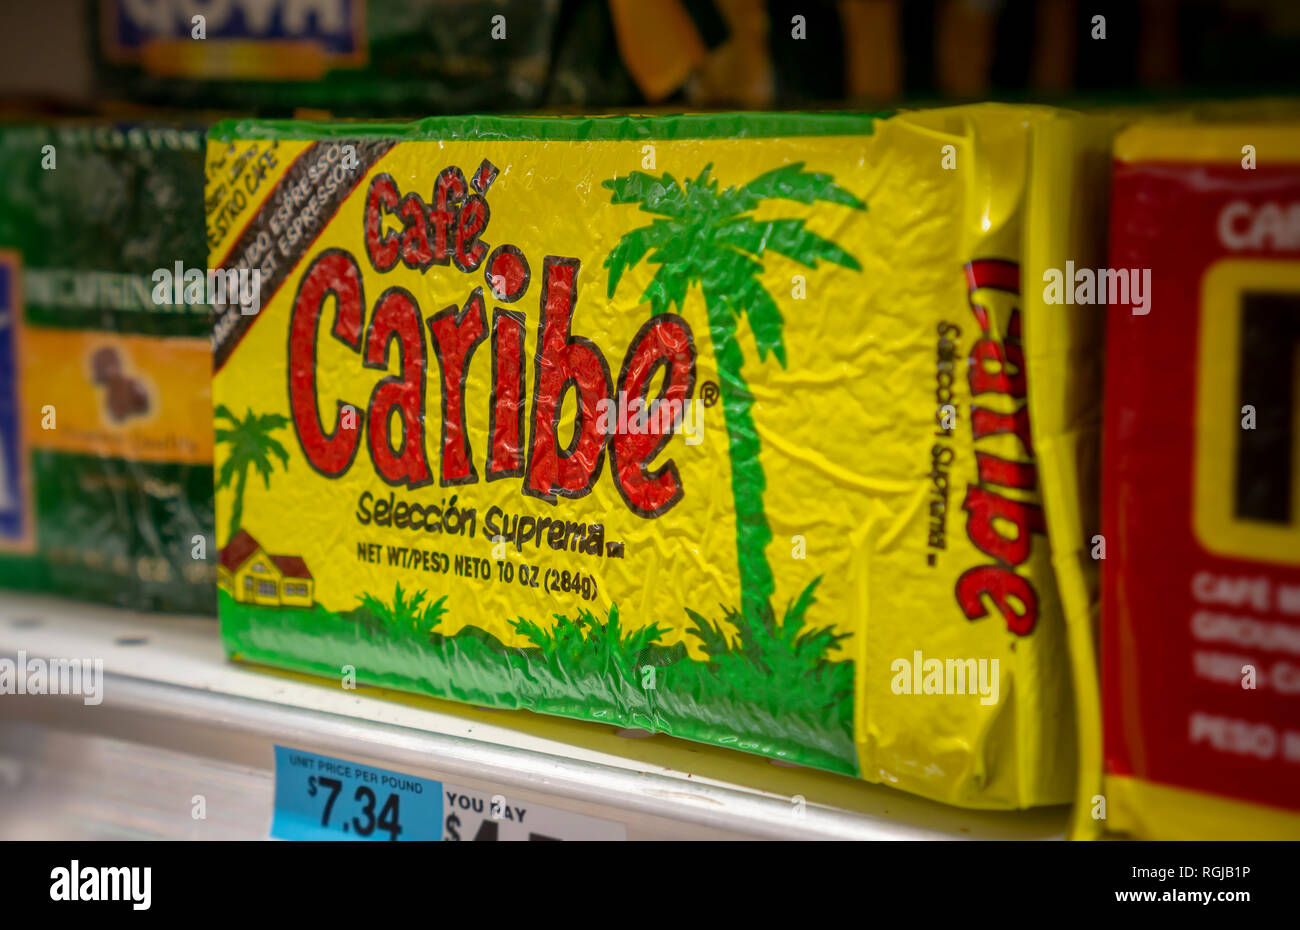 Bricks of Coffee Holding Co.'s CafÃ© Caribe brand on a supermarket shelf in New York on Tuesday, January 22, 2019. The Coffee Holding Co., Inc. manufactures and markets their coffees in the United States, Canada, Australia, England, and China. (Â© Richard B. Levine) Stock Photo